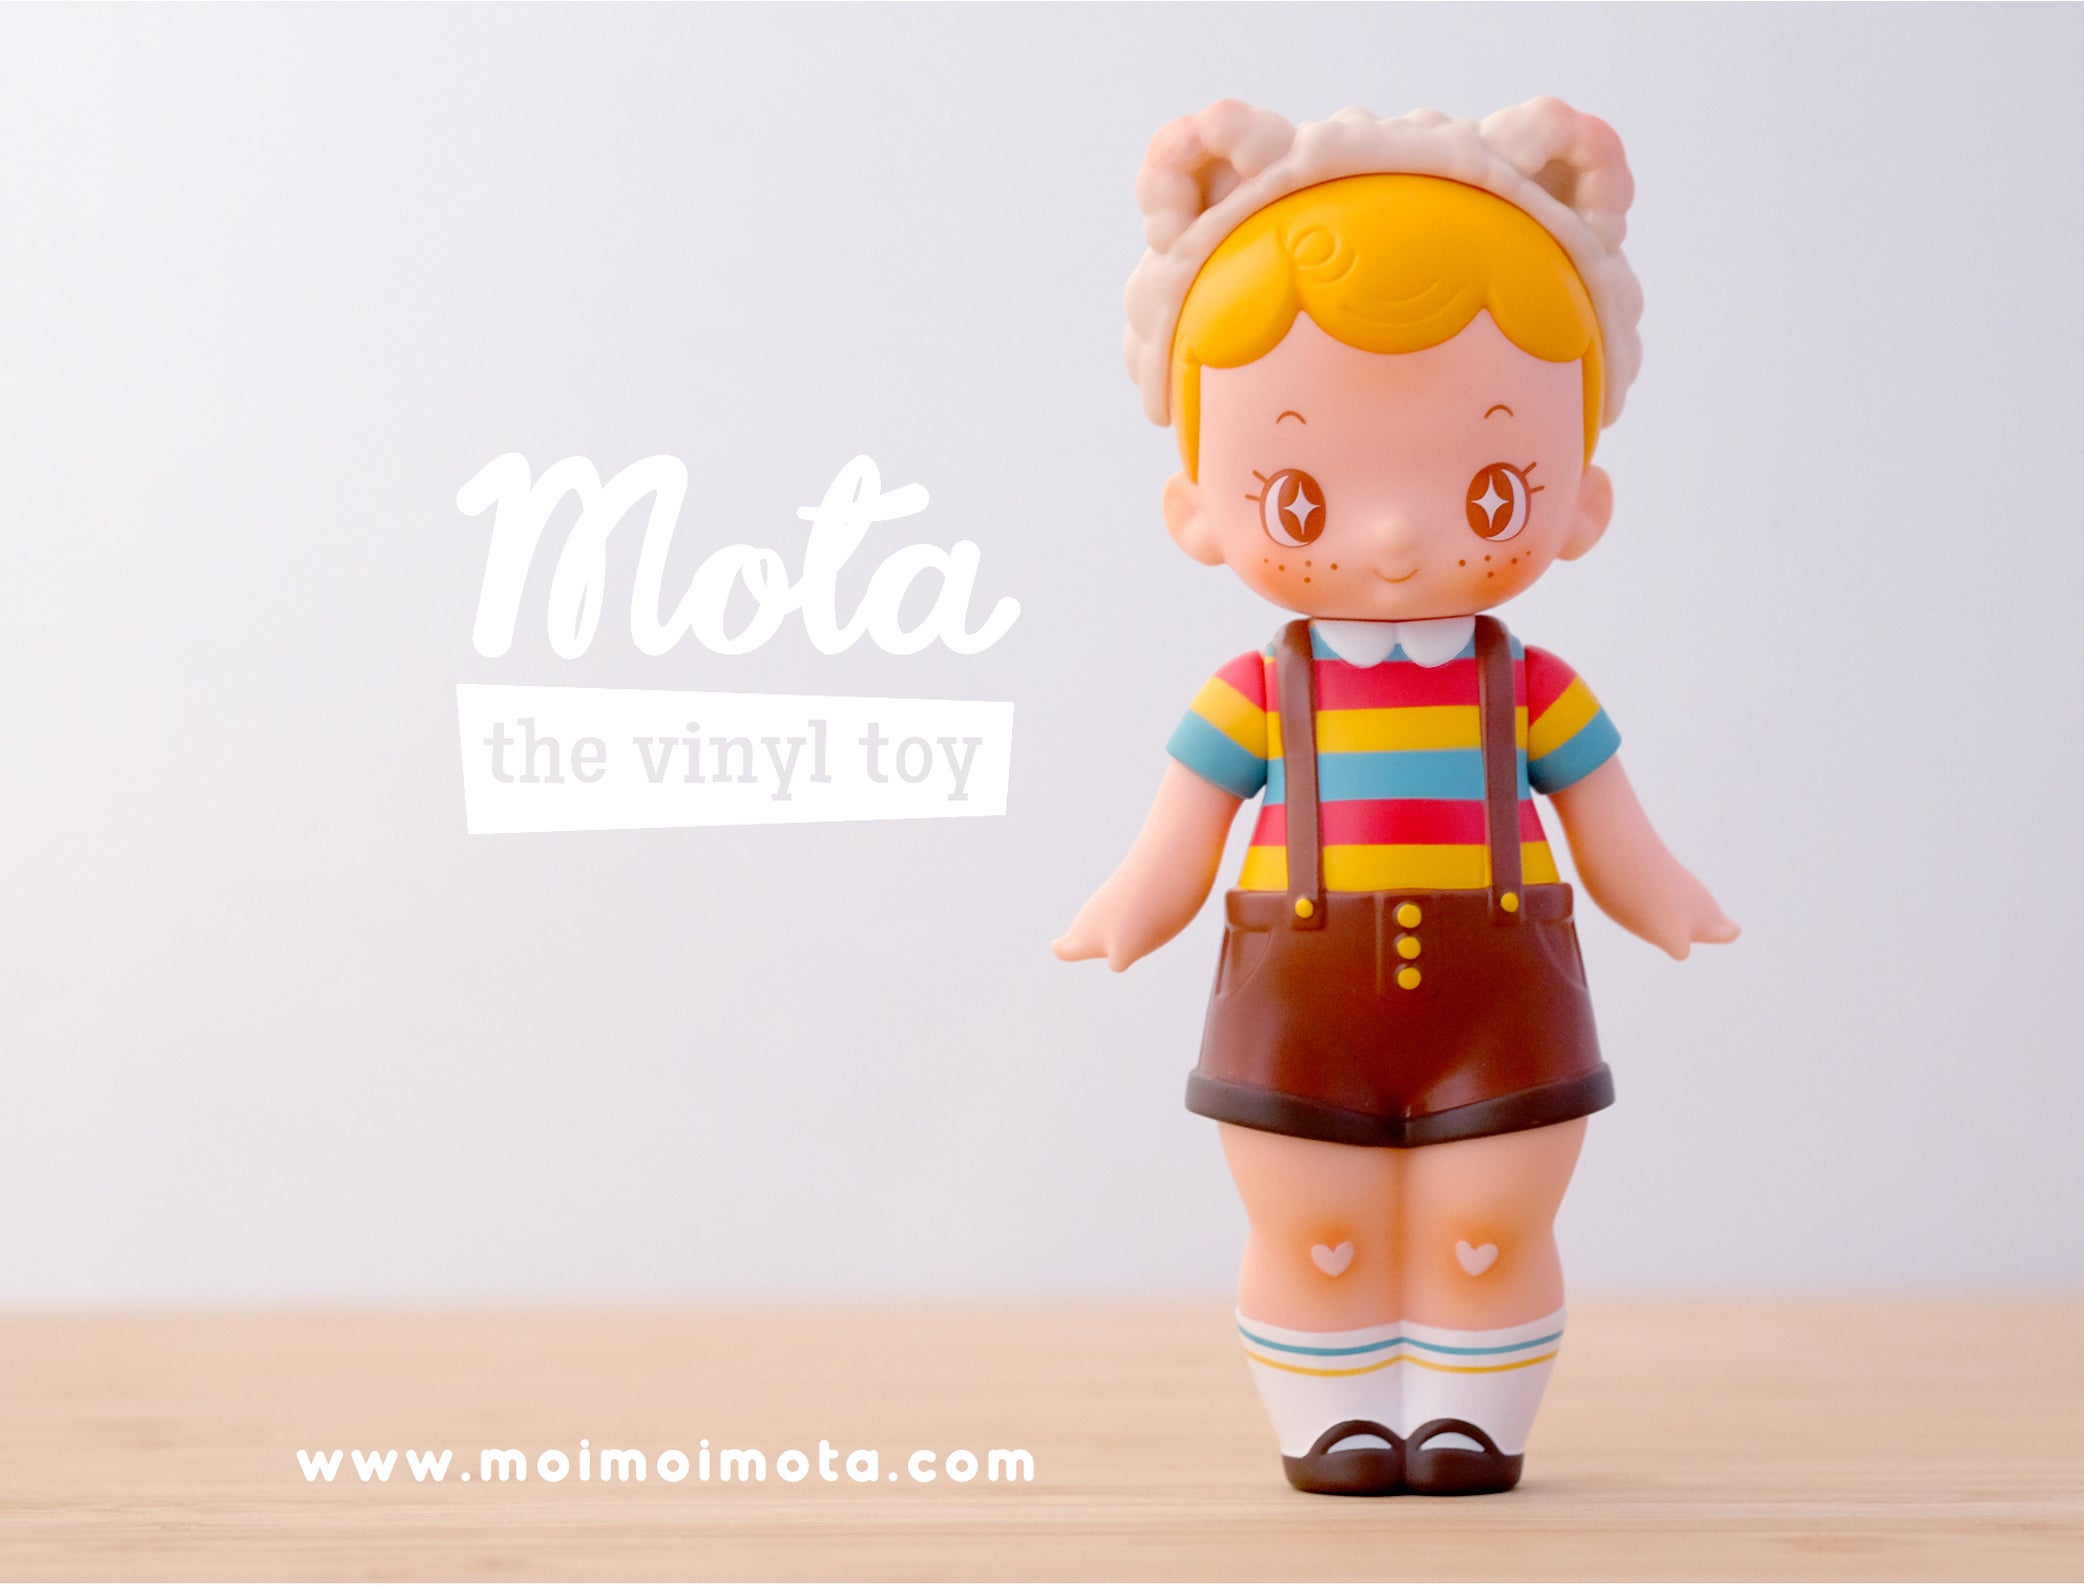 Toy figurines of a girl and boy by Nuria Torras, Mota series, vinyl material, 12cm size, limited edition of 99pcs.